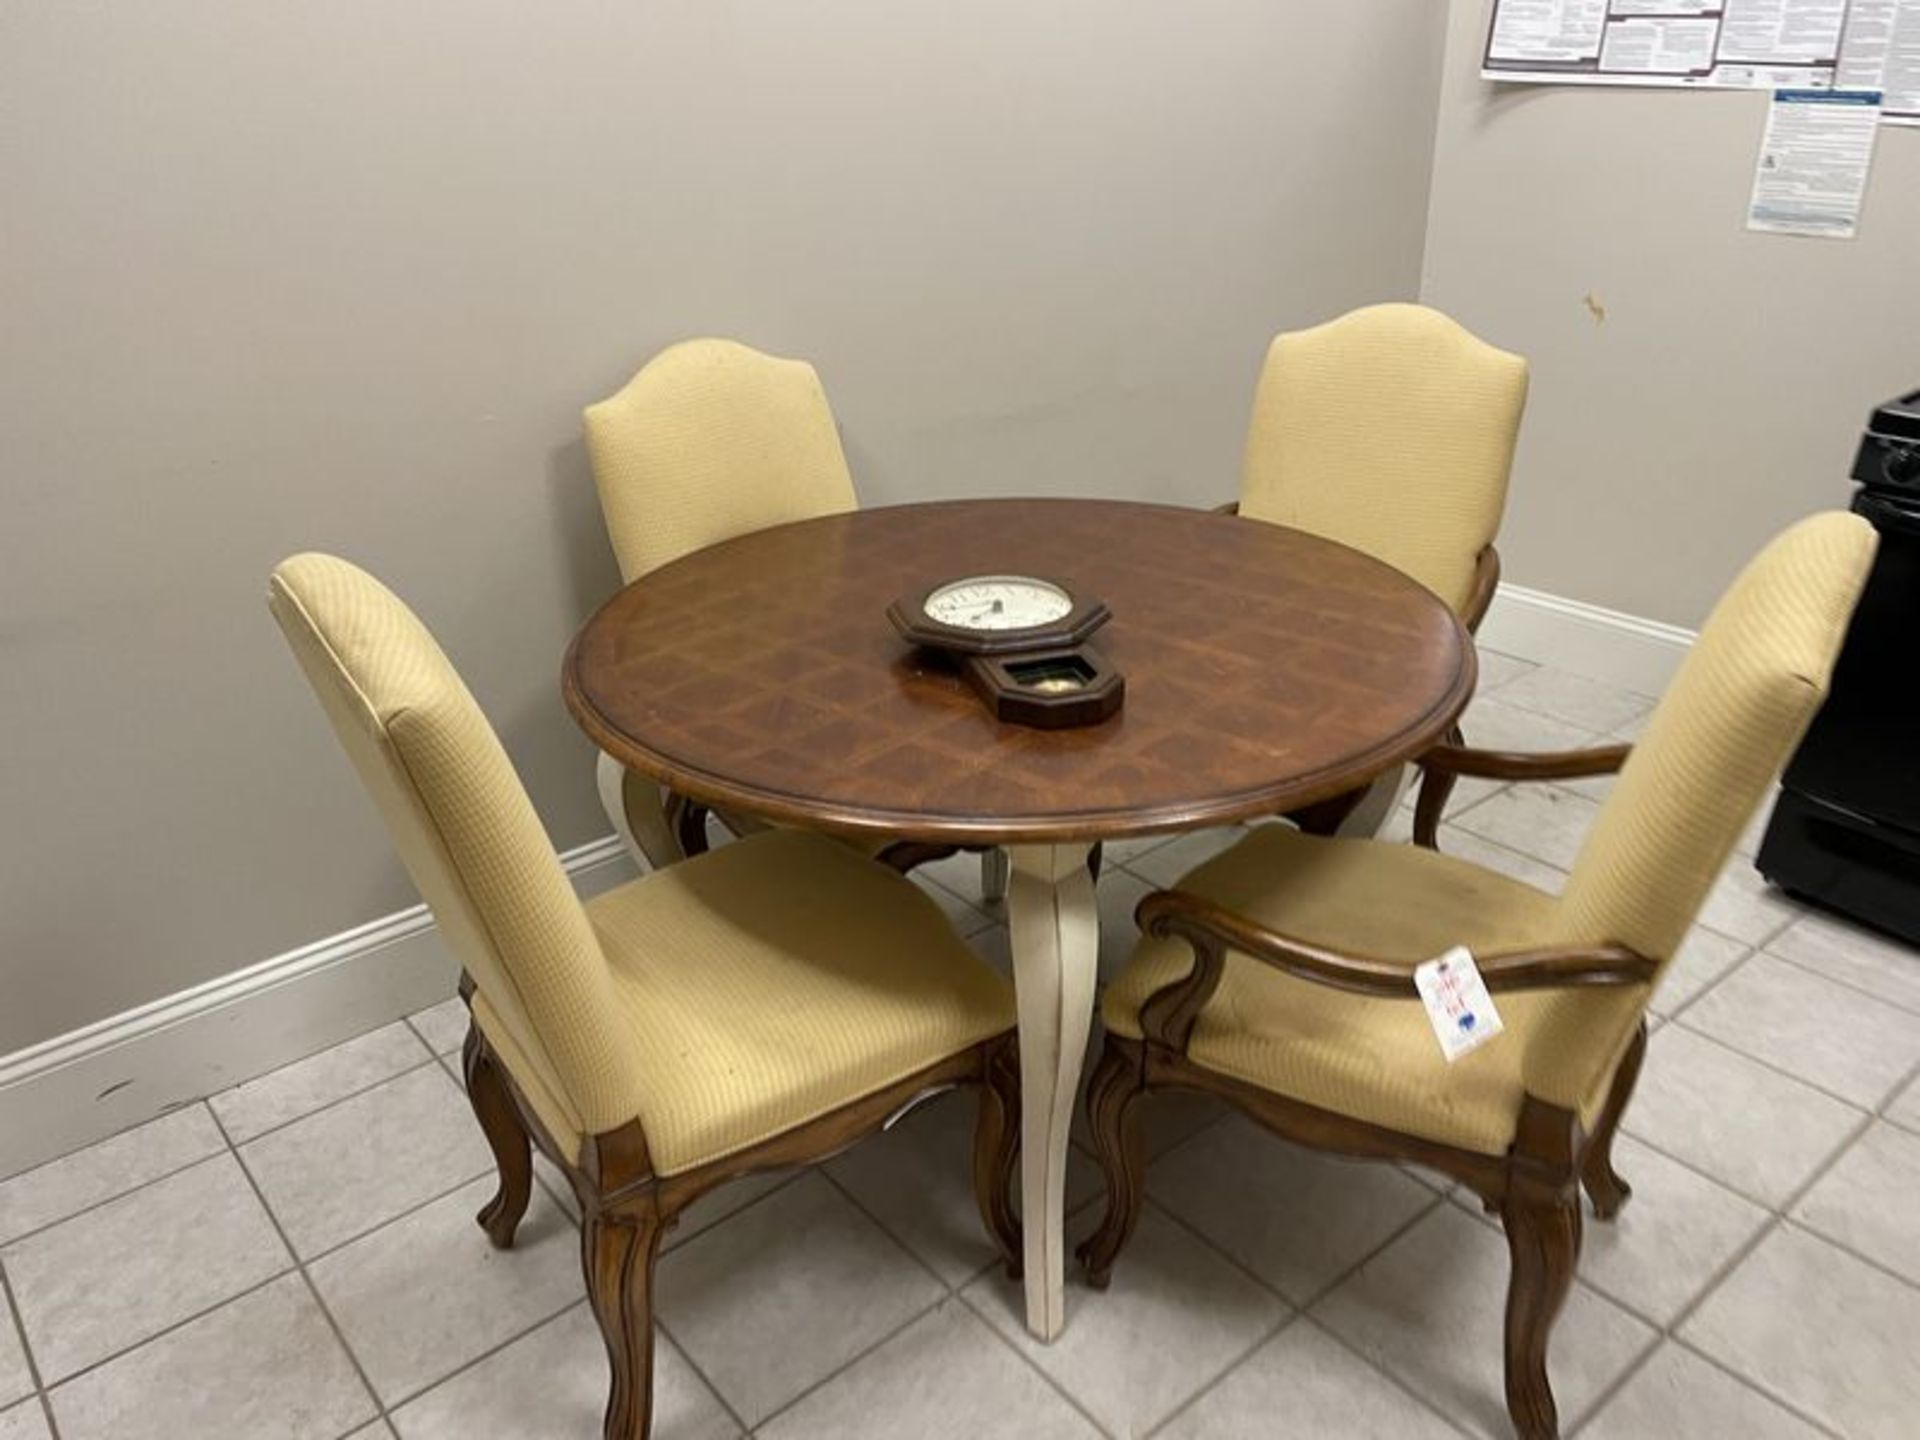 (Lot) Kitchen C/O: Table w/ (4) Matching Chairs, Fridge, Electric Oven, Microwave MUST TAKE ALL